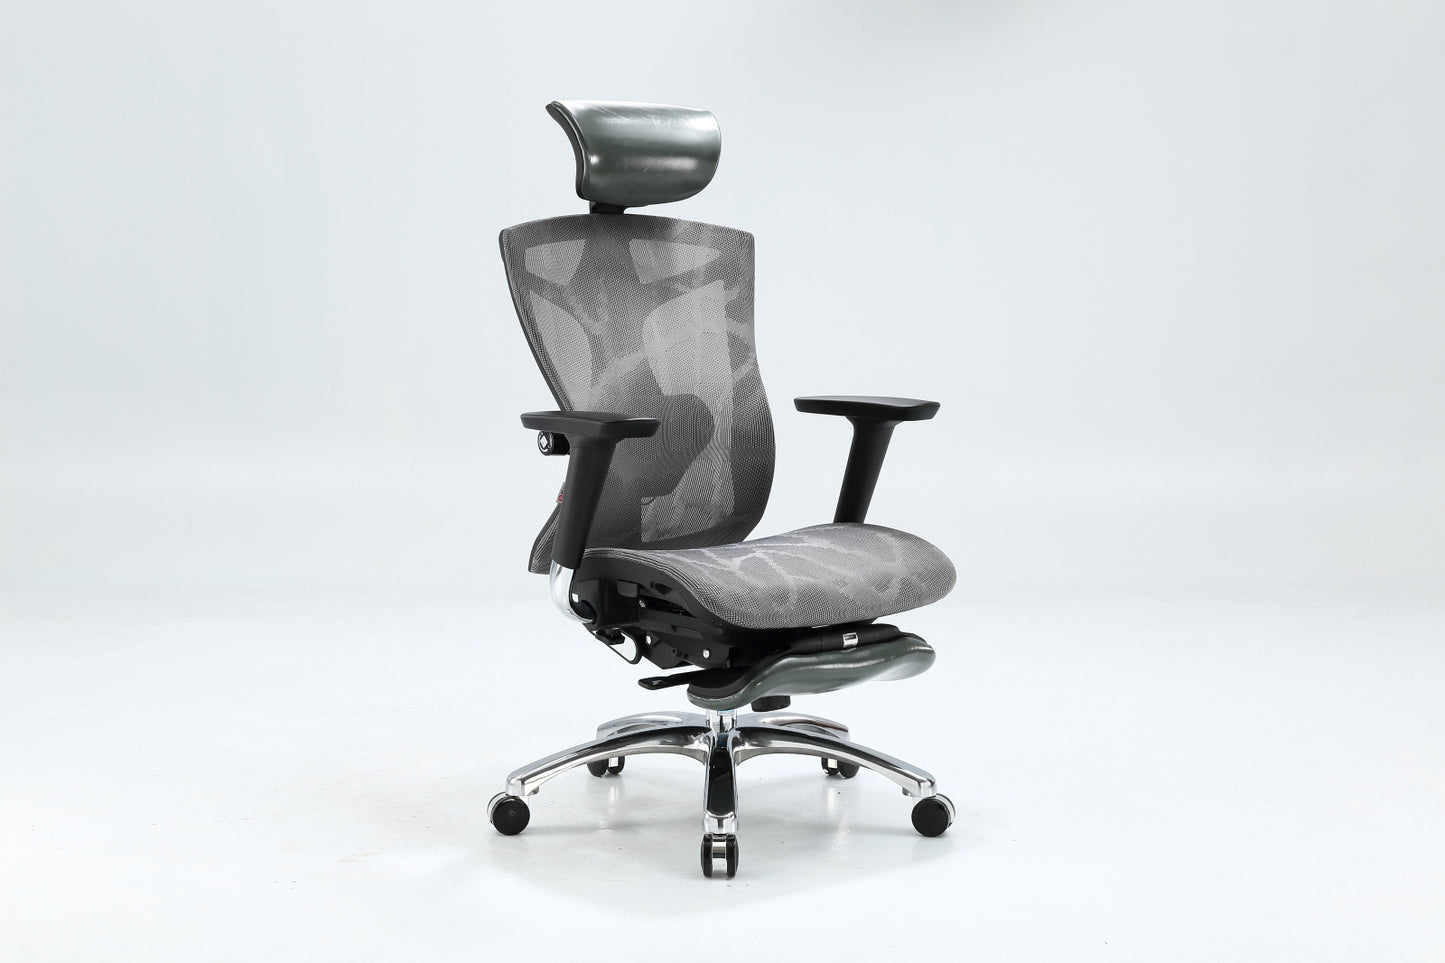 Sihoo V1 Ergonomic Chair (with built-in footrest)